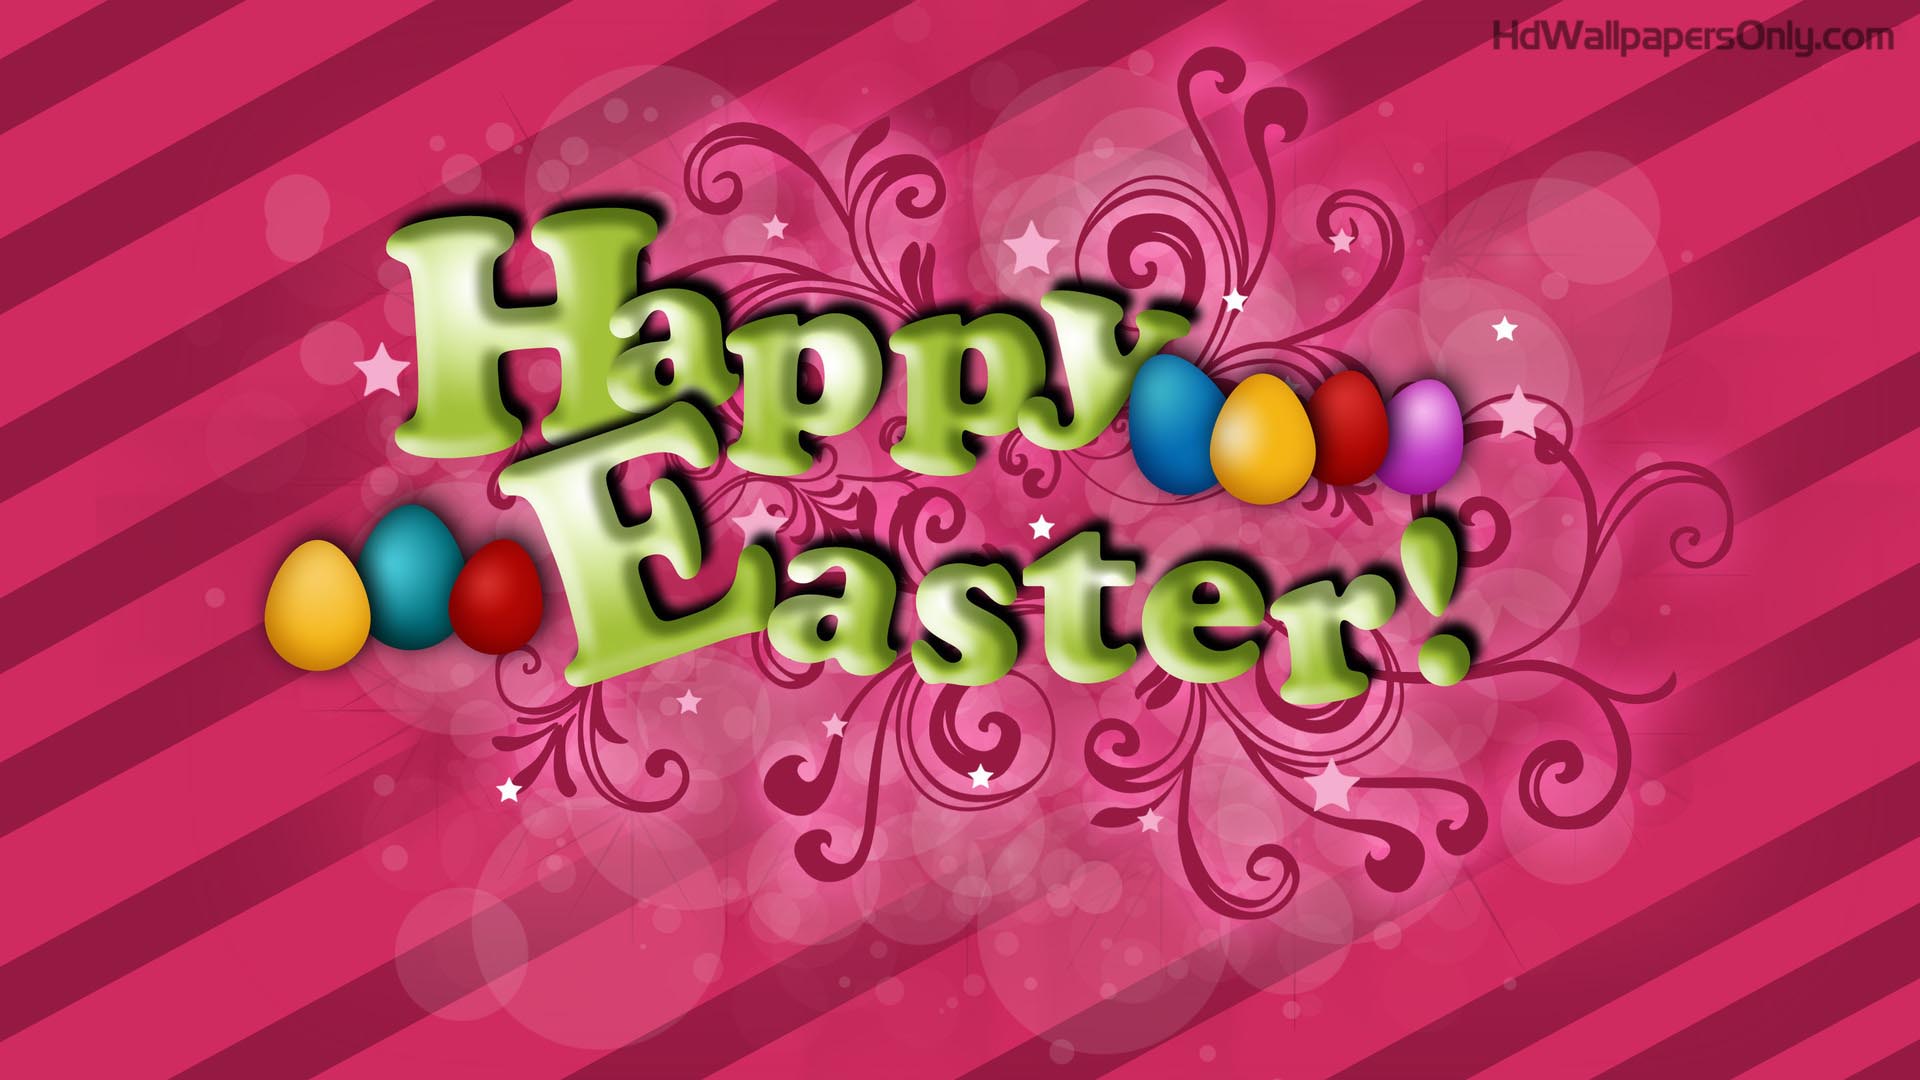 Free Easter Wallpapers Hd Qualityhd Wallpapers Only   Happy Easter